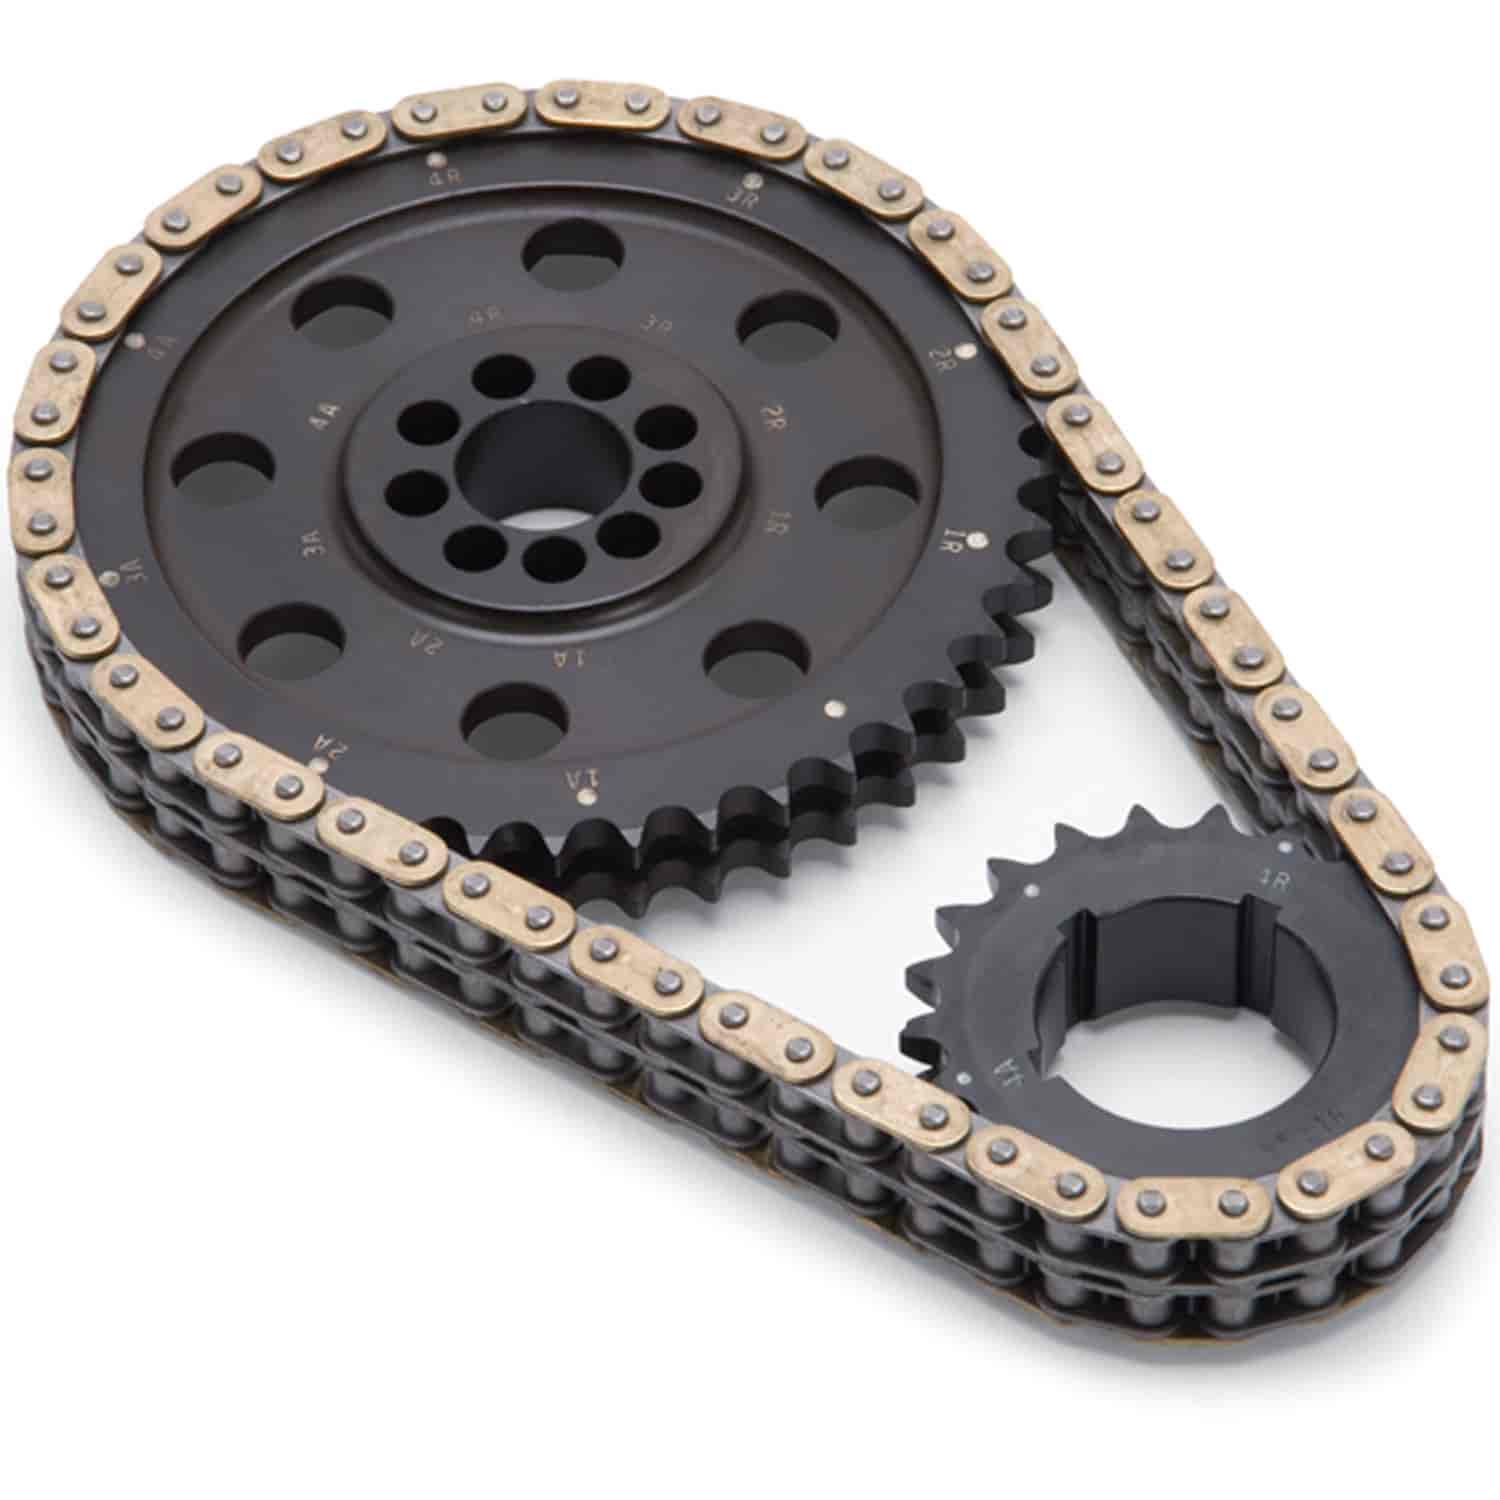 RPM-Link Timing Chain Set for 1962-1984 Small Block Ford 221-351W V8